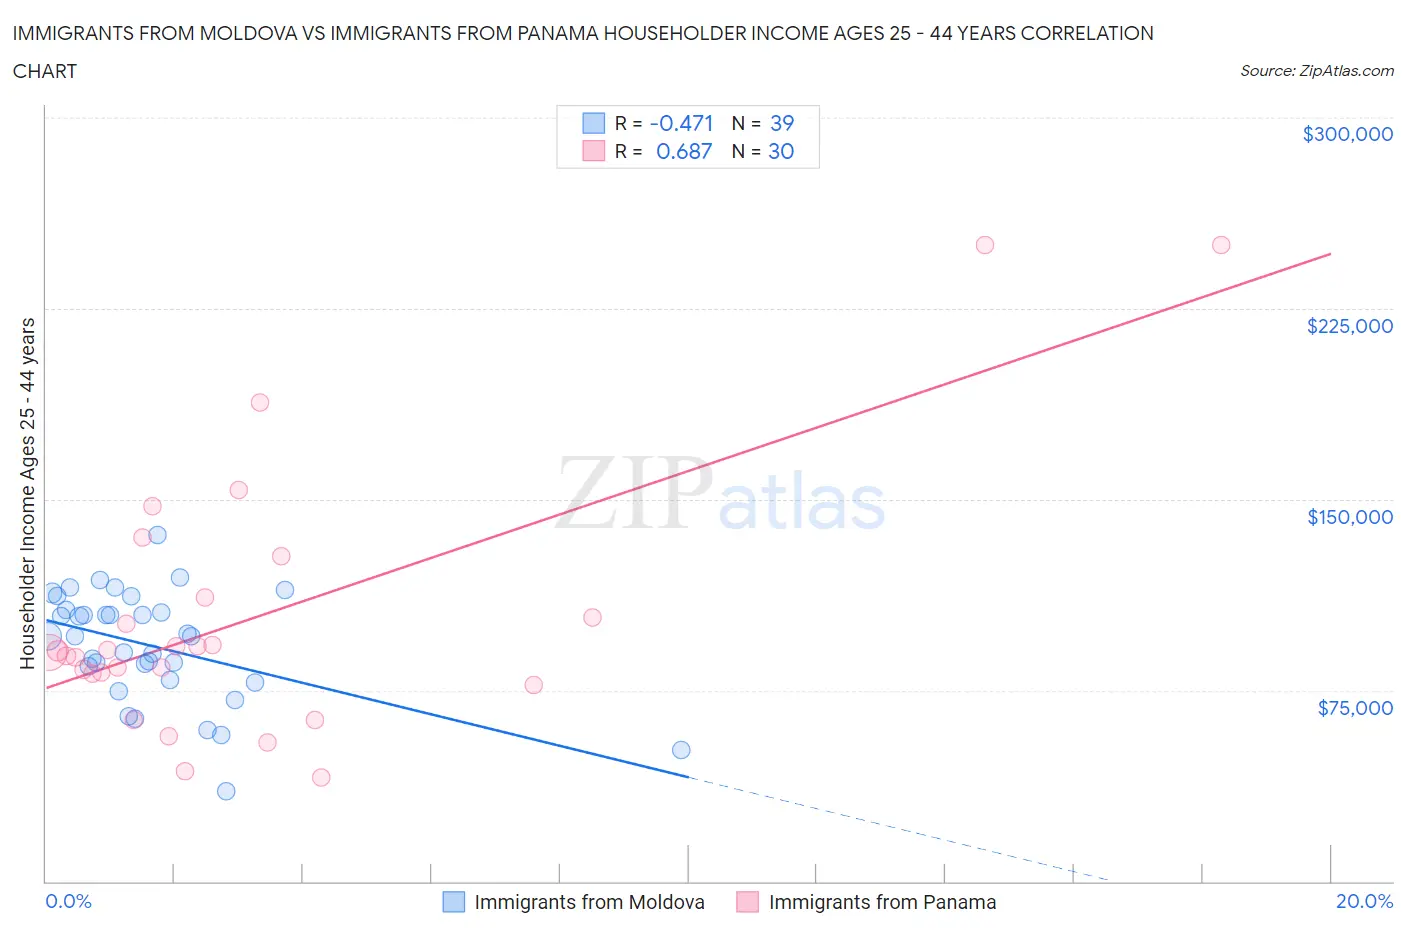 Immigrants from Moldova vs Immigrants from Panama Householder Income Ages 25 - 44 years